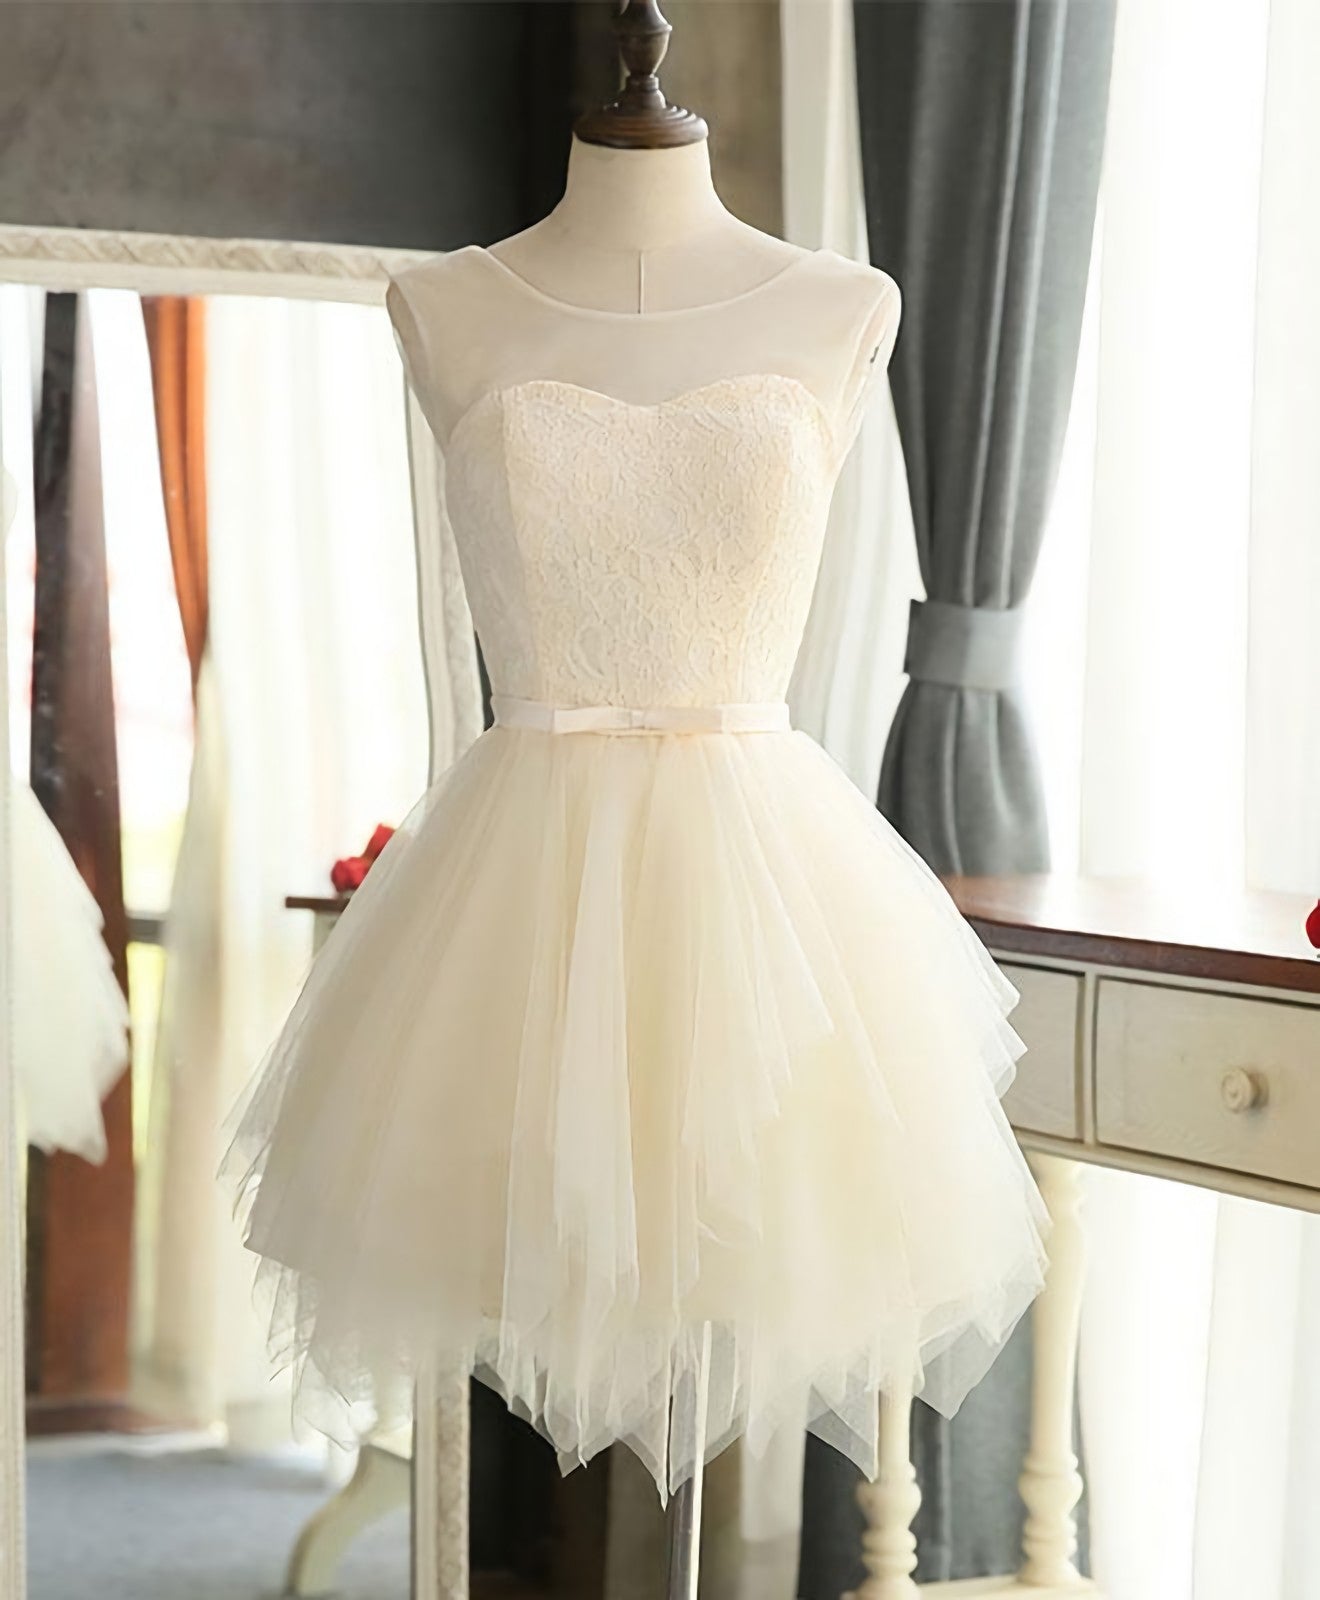 Formal Dress For Beach Wedding, Cute A Line Tulle Round Neck Mini Prom Dress, Evening Dress